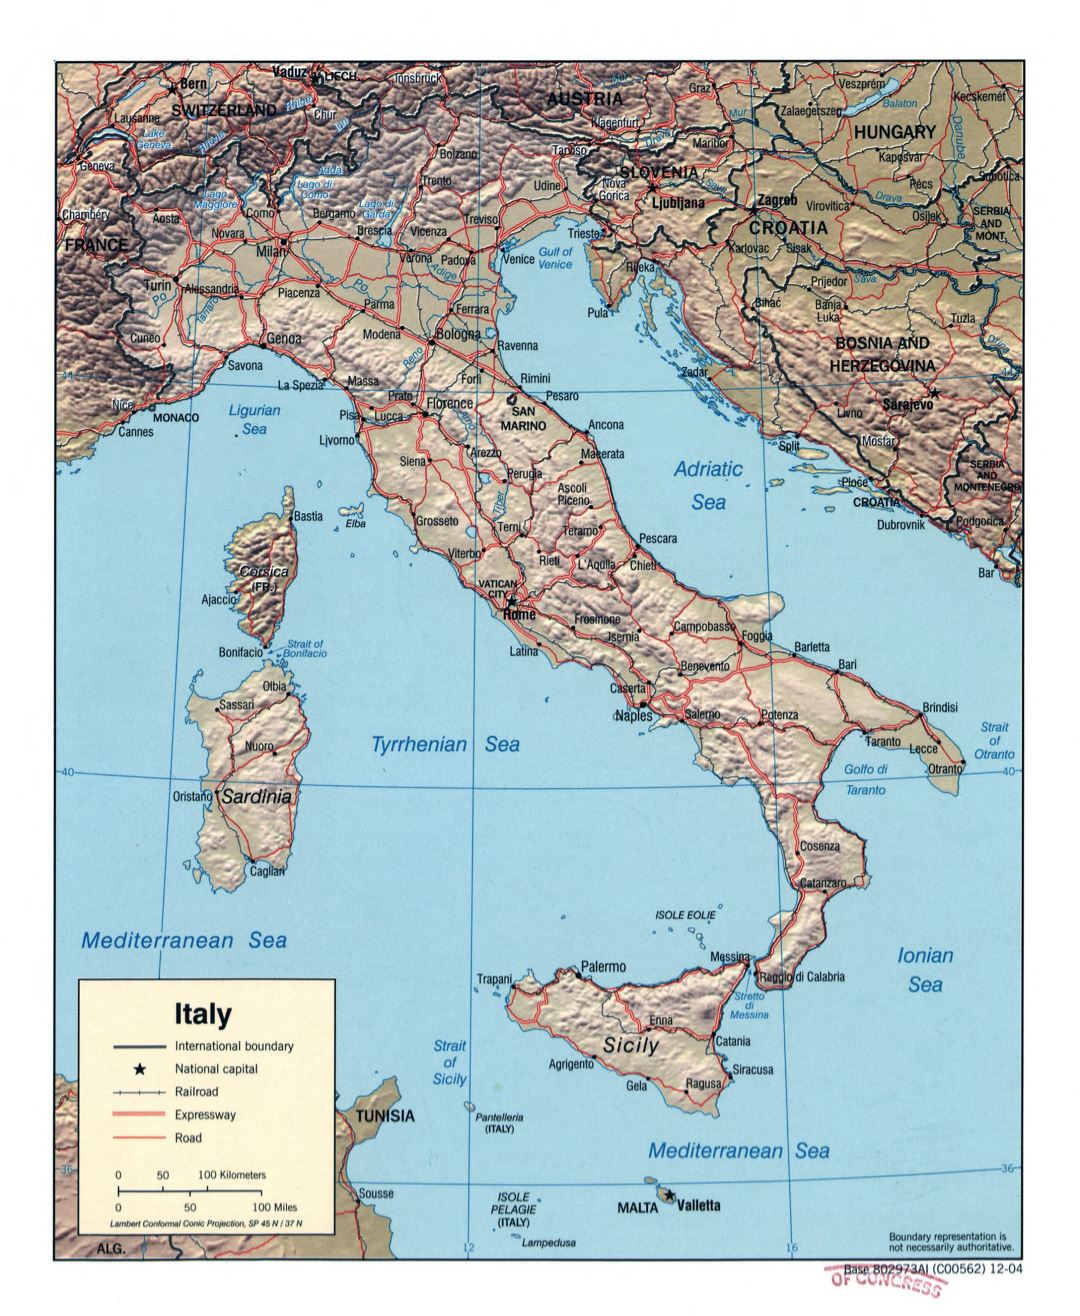 Large scale political map of Italy with relief, roads, railroads and major cities - 2004